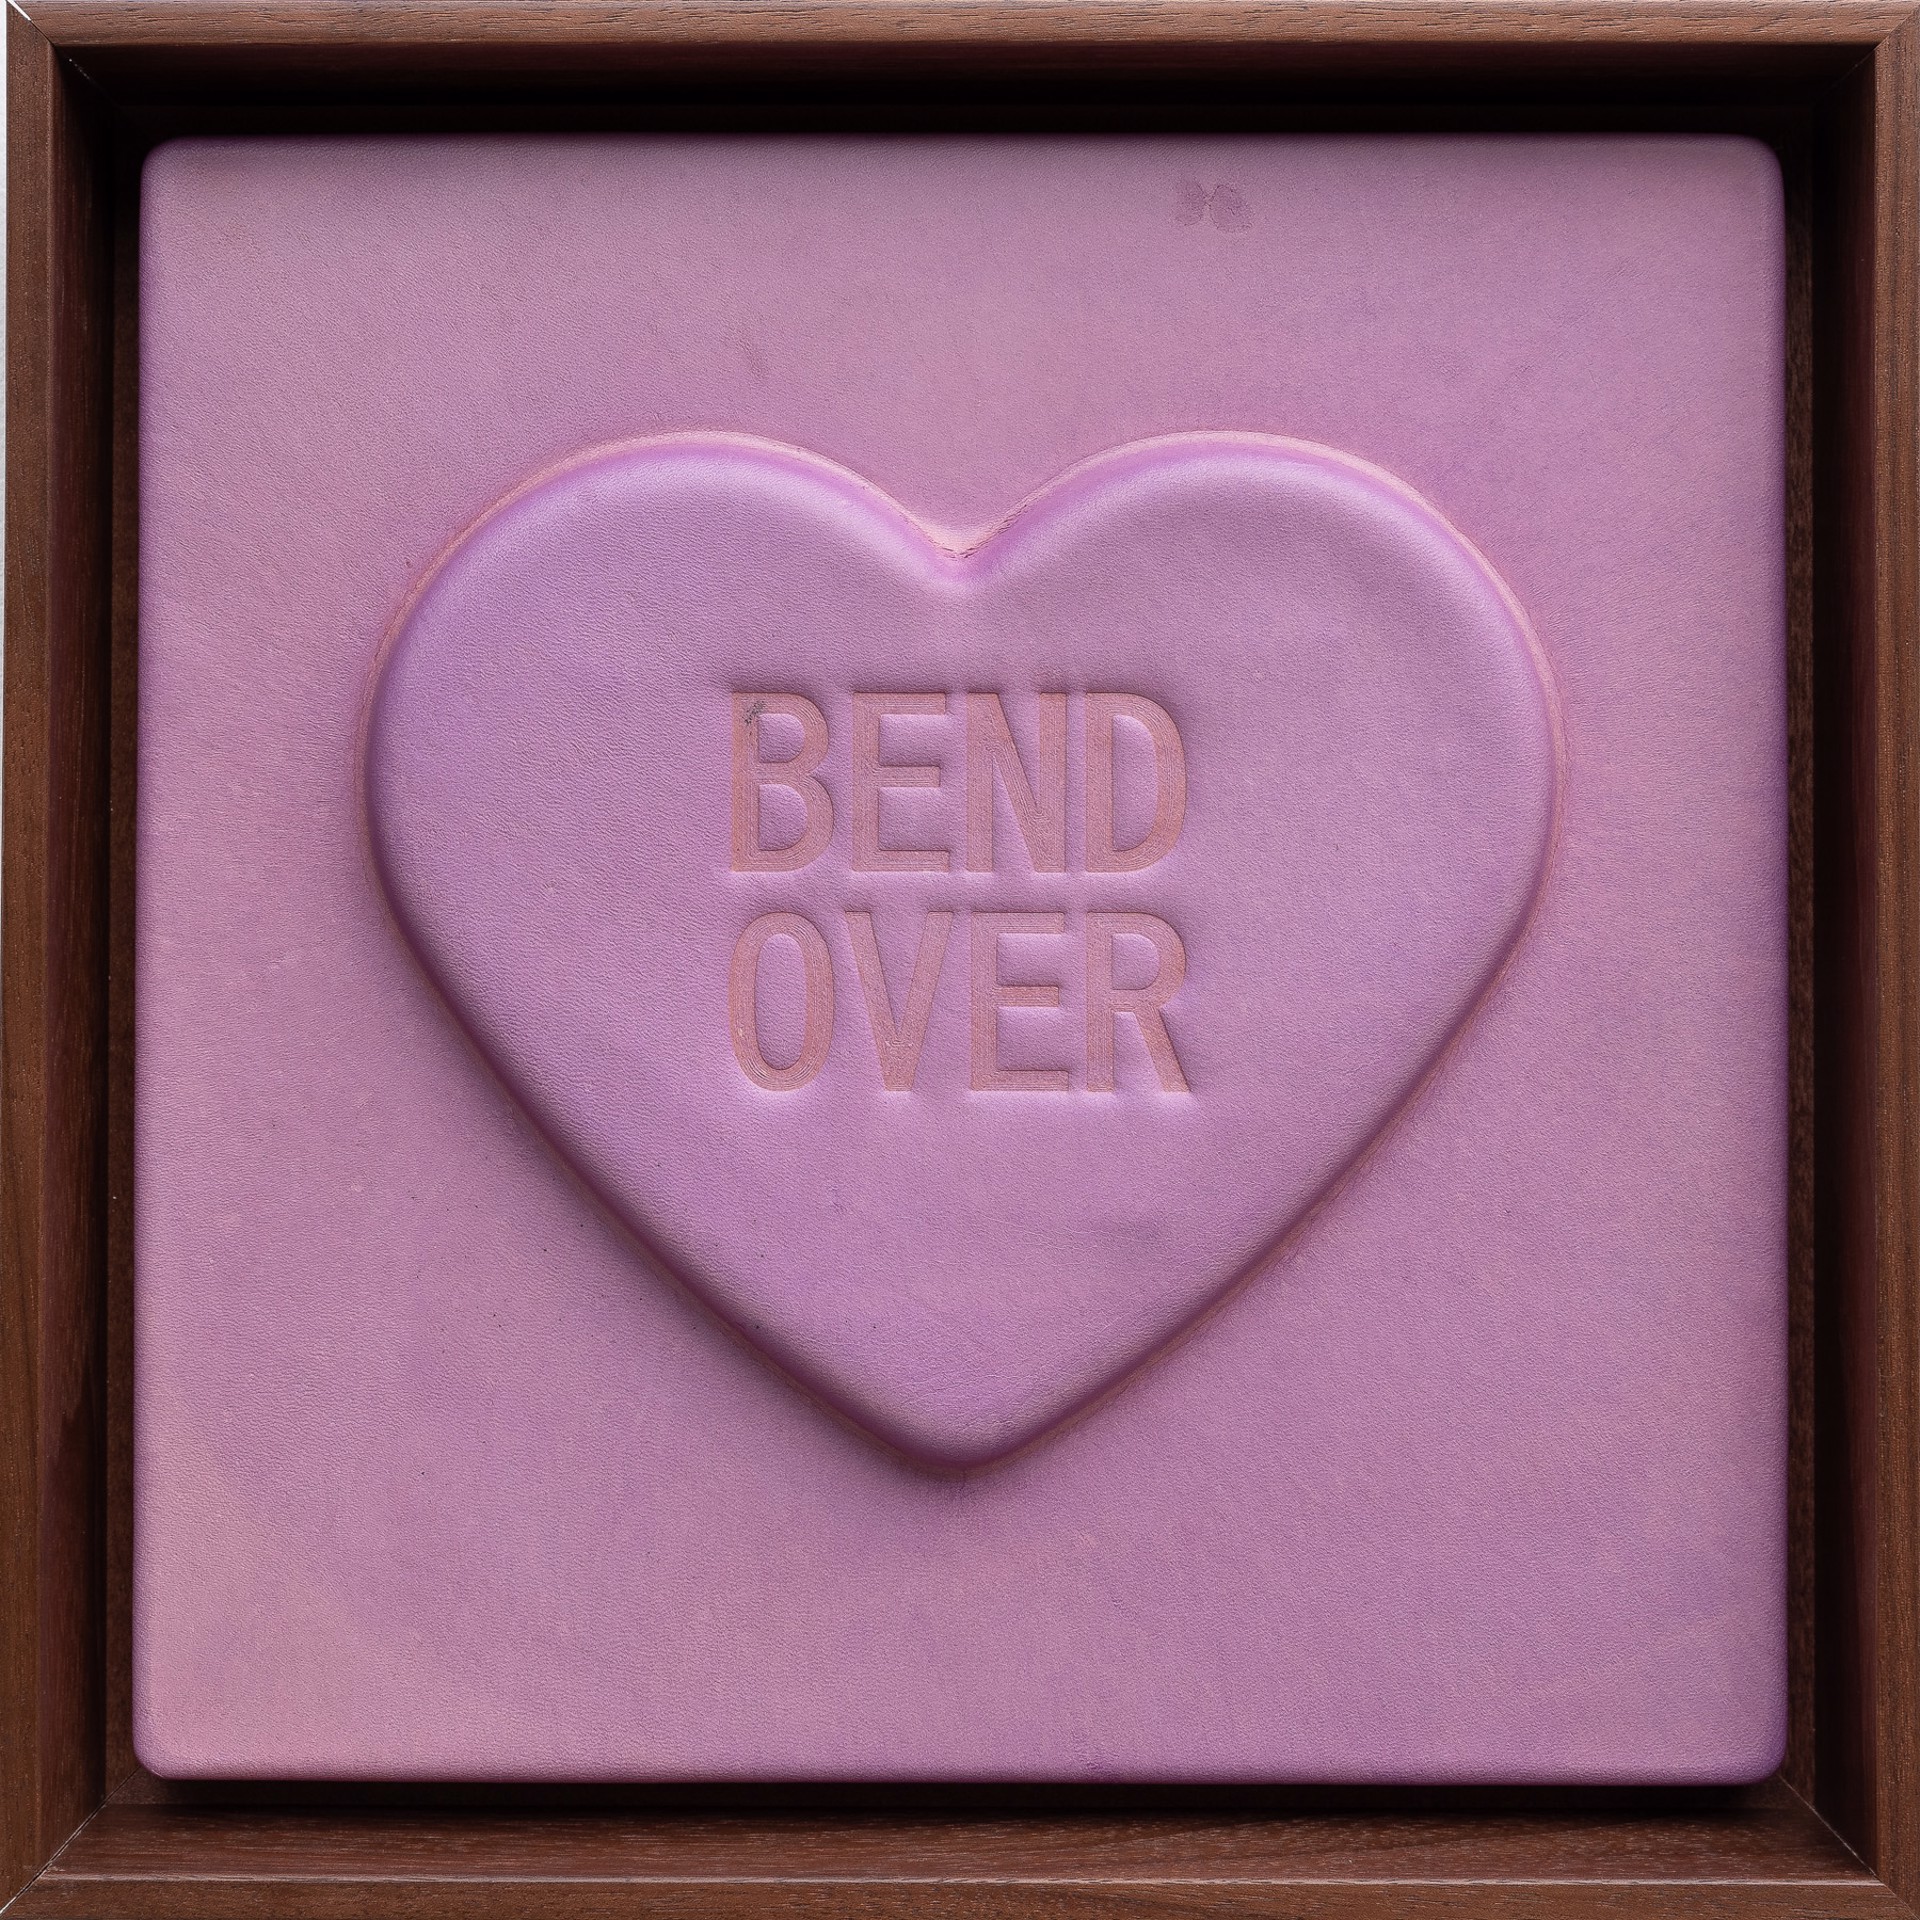 'BEND OVER' - Sweetheart series by Mx. Hyde